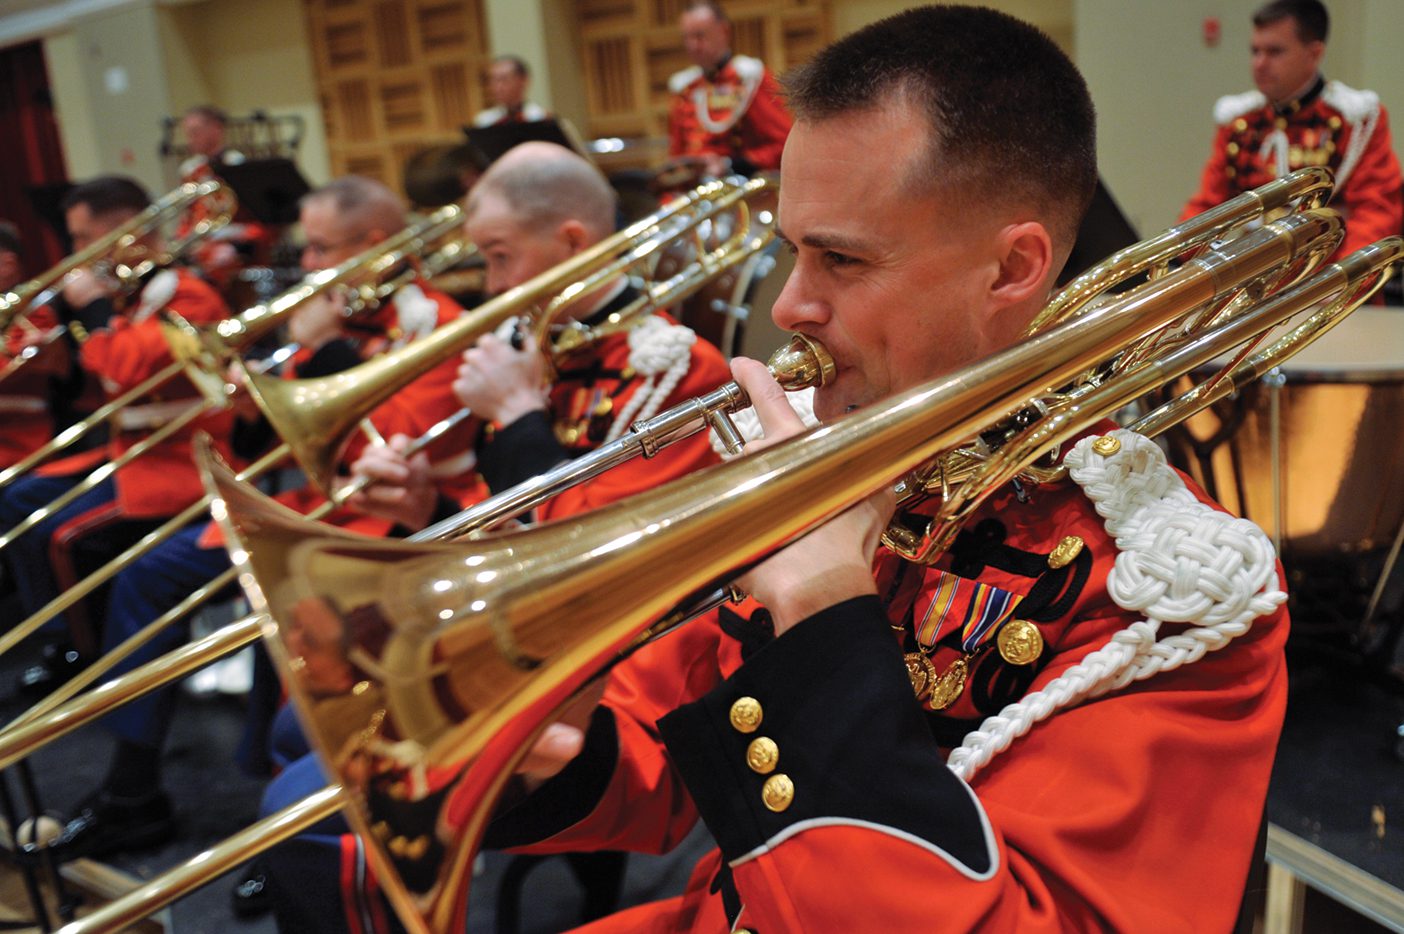 A man in a red, decorative military jacket plays the bass trombone.